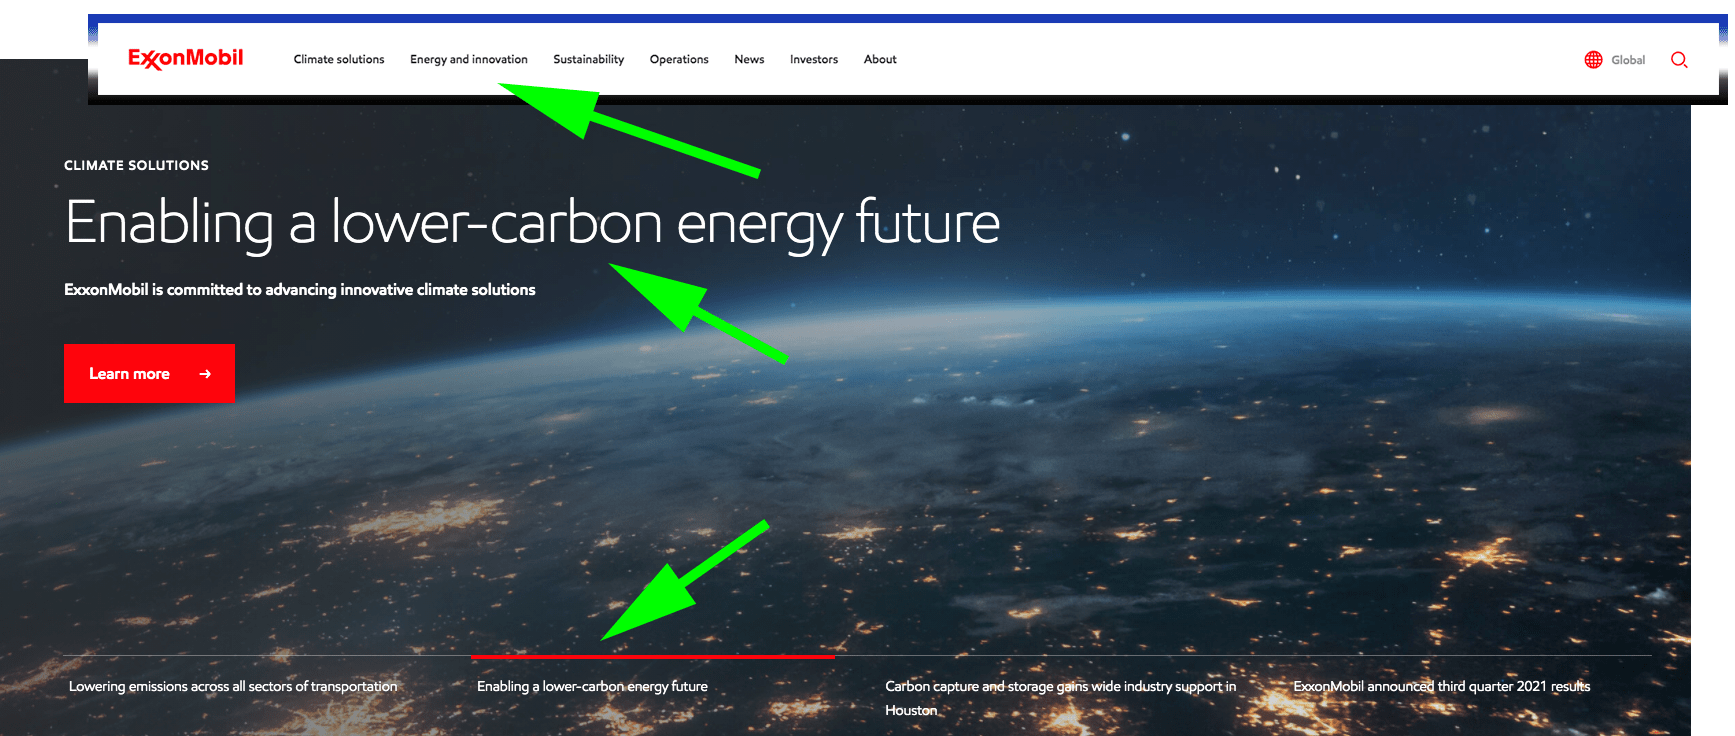 Exxon mobile homepage with highlighted navigation and green arrows pointing to the heading and important call outs